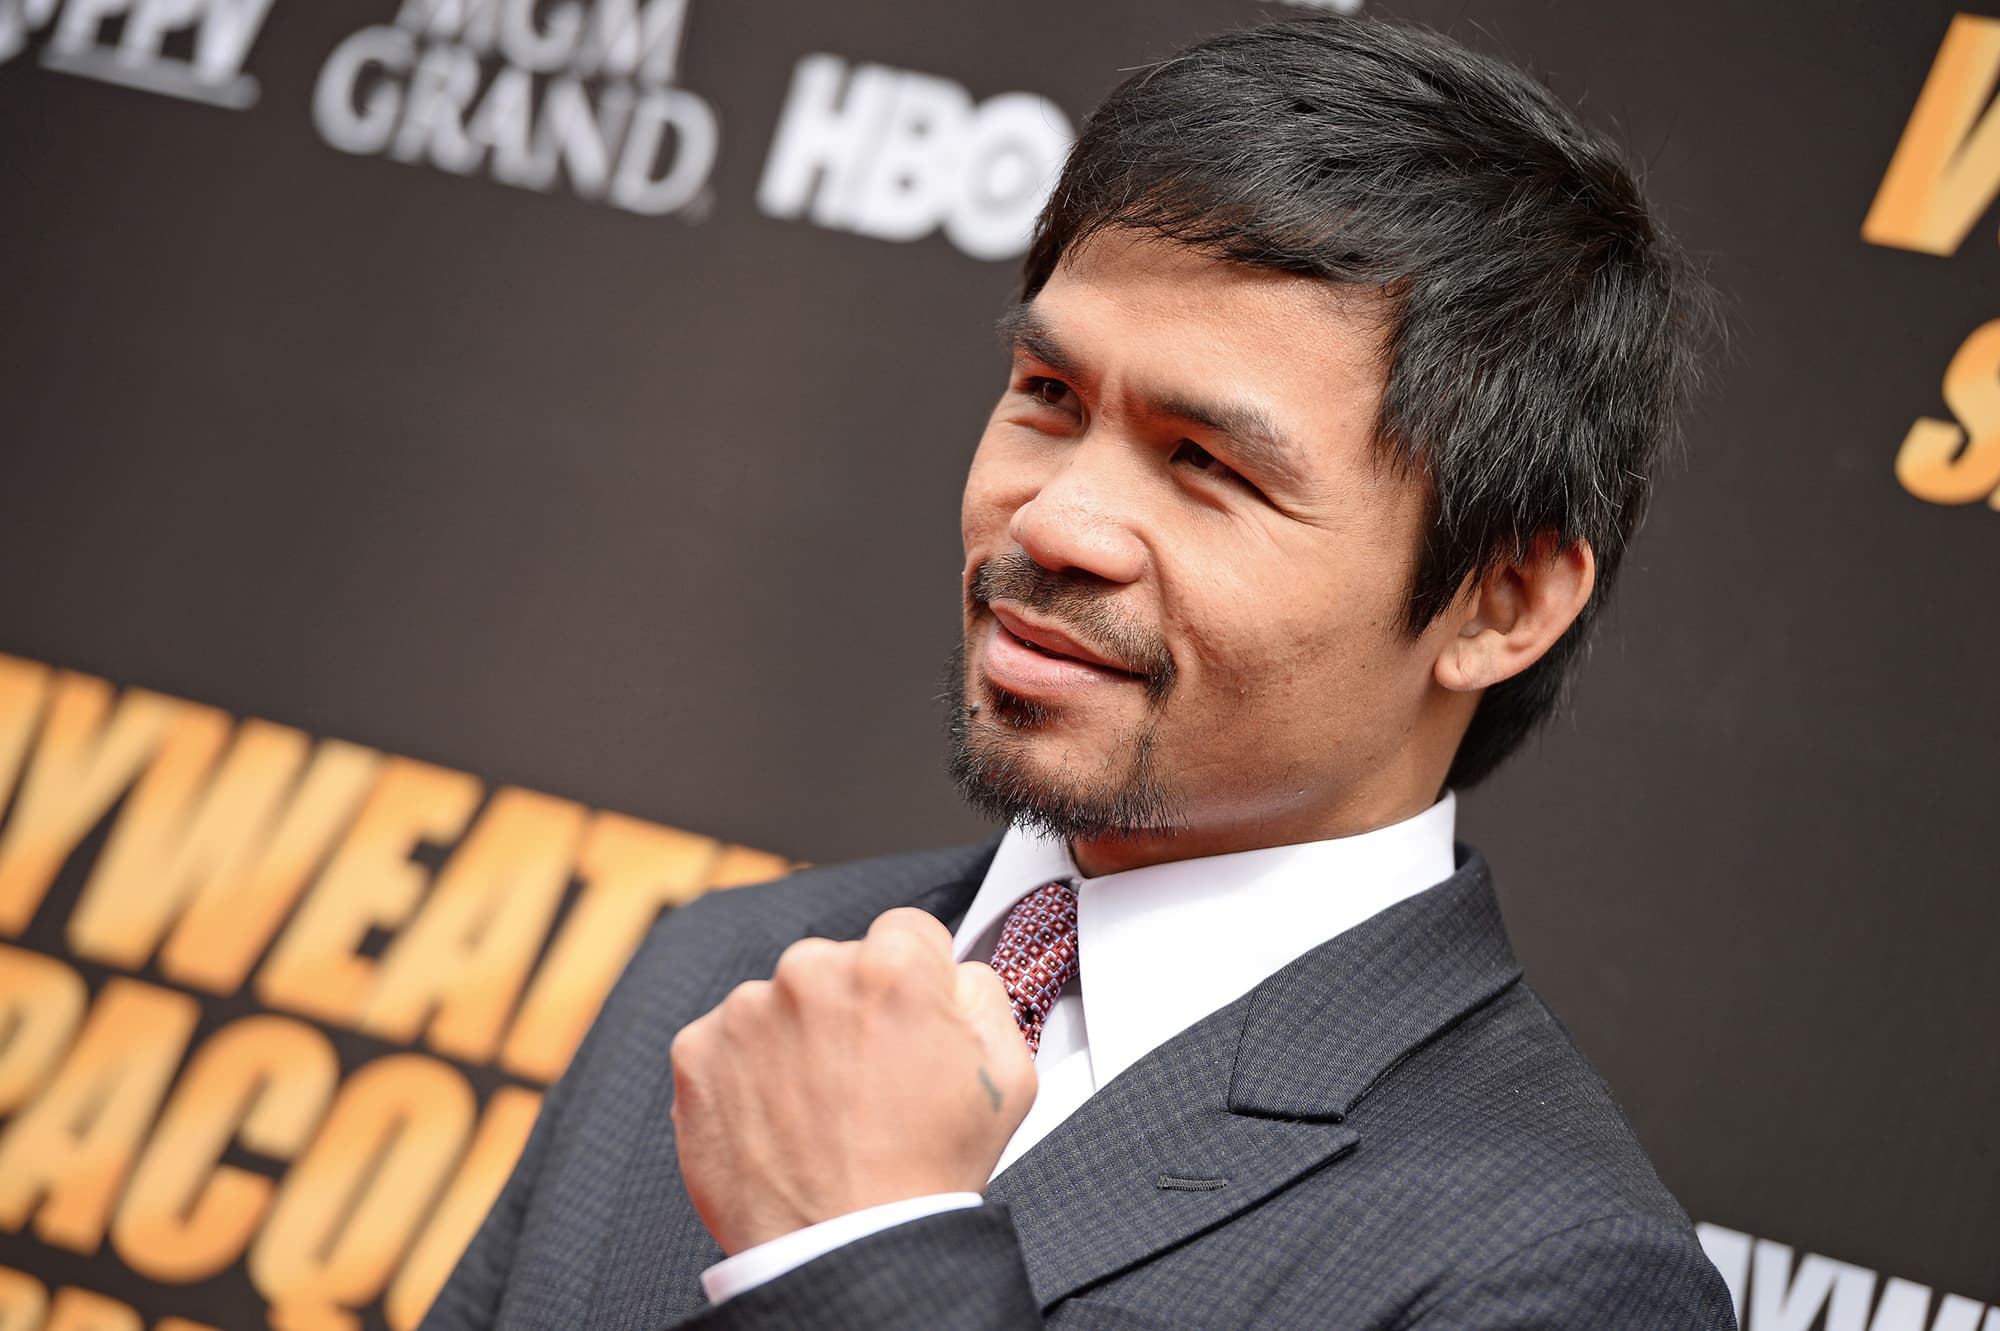 Manny Pacquiao officially retires from boxing to chase Philippine presidential bid